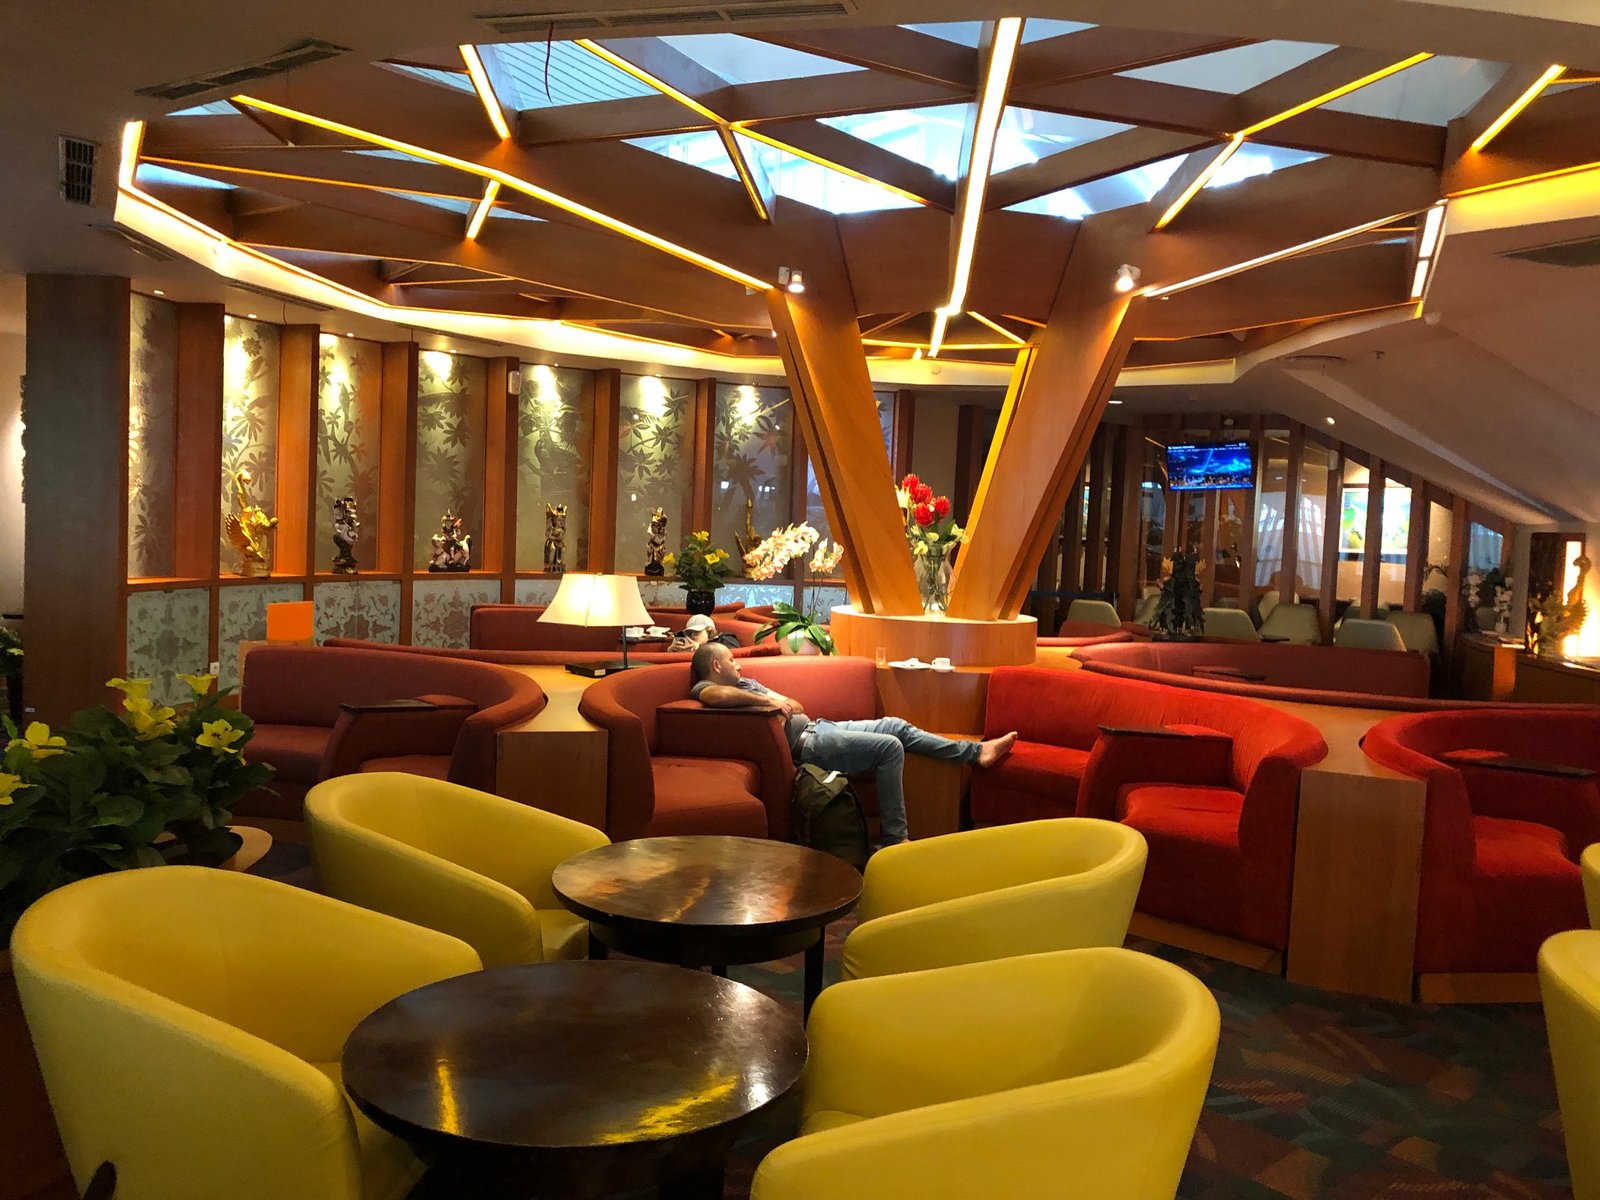 Bali Airport Lounge Hopping | The Seat in the Middle